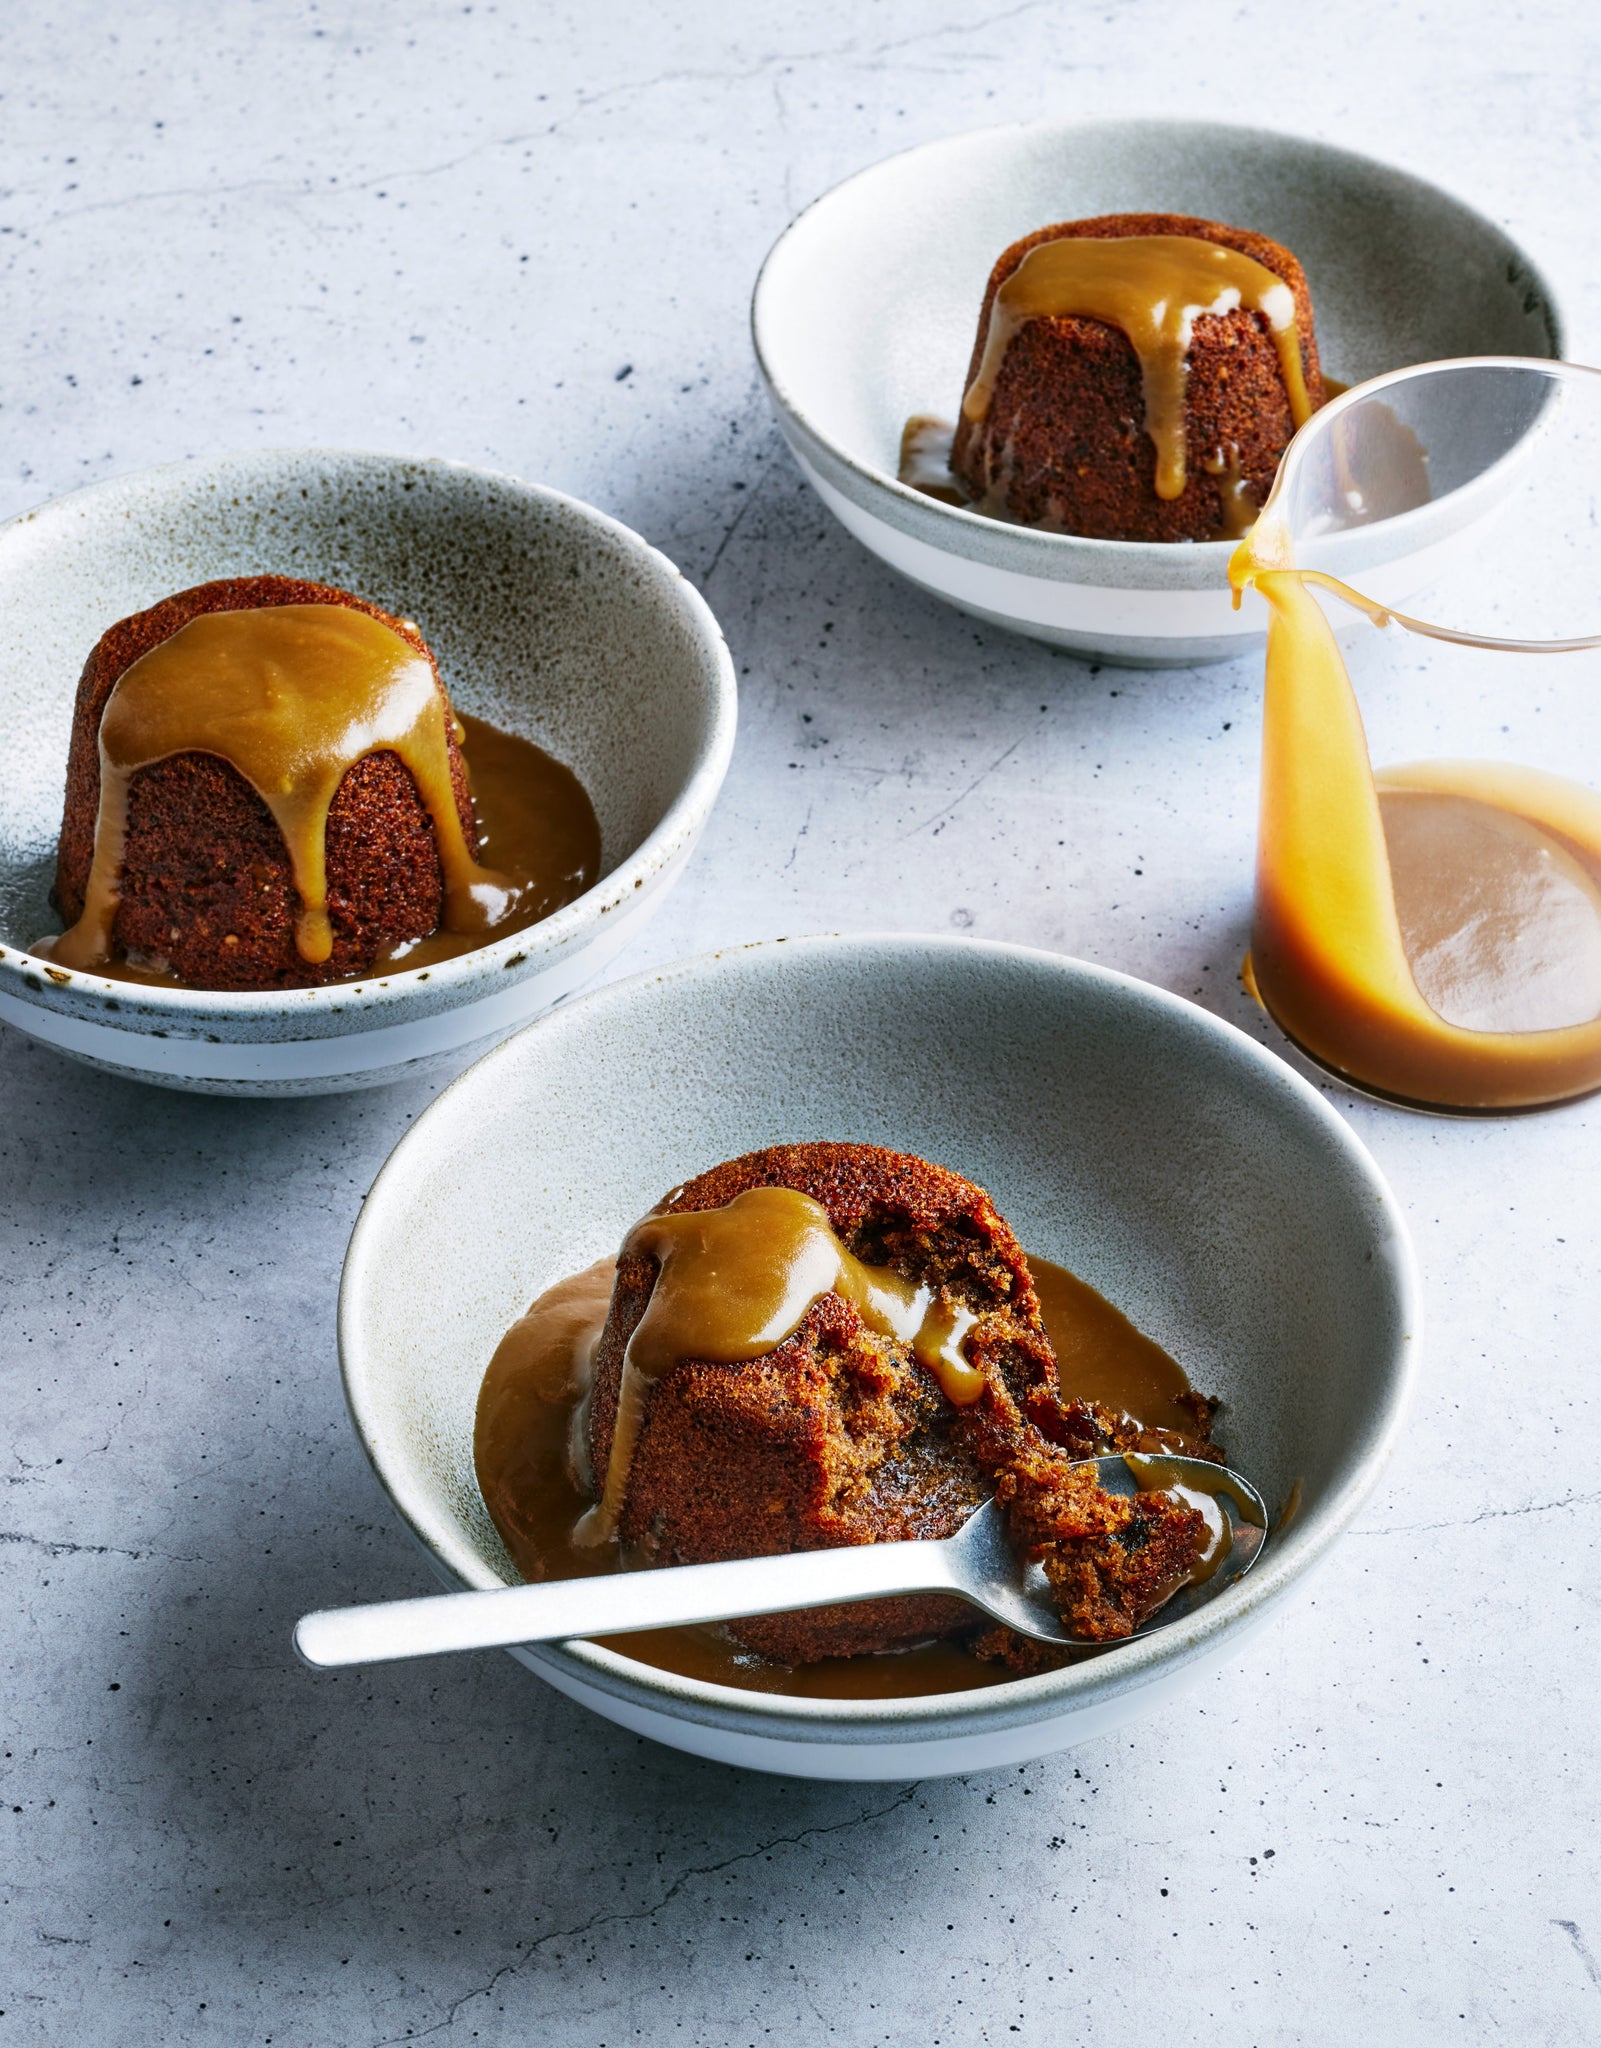 Little sticky date puddings with salted toffee sauce